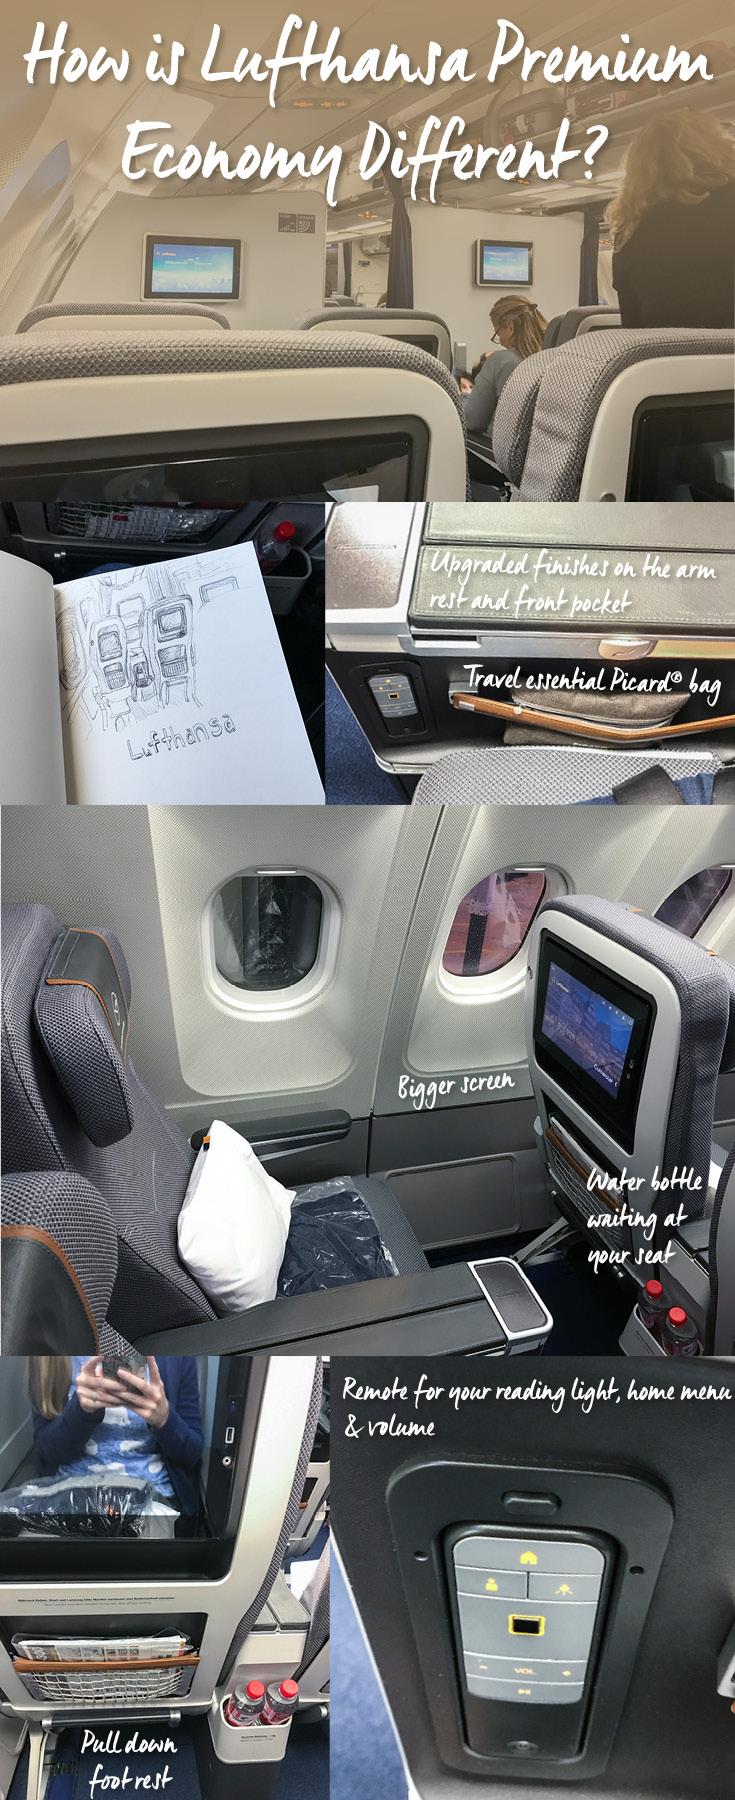 A first-hand review from a passenger who upgraded for anxiety reasons. It explains the differences between the Premium and regular Economy for Lufthansa. Includes annotated photos of the upgraded finishes.